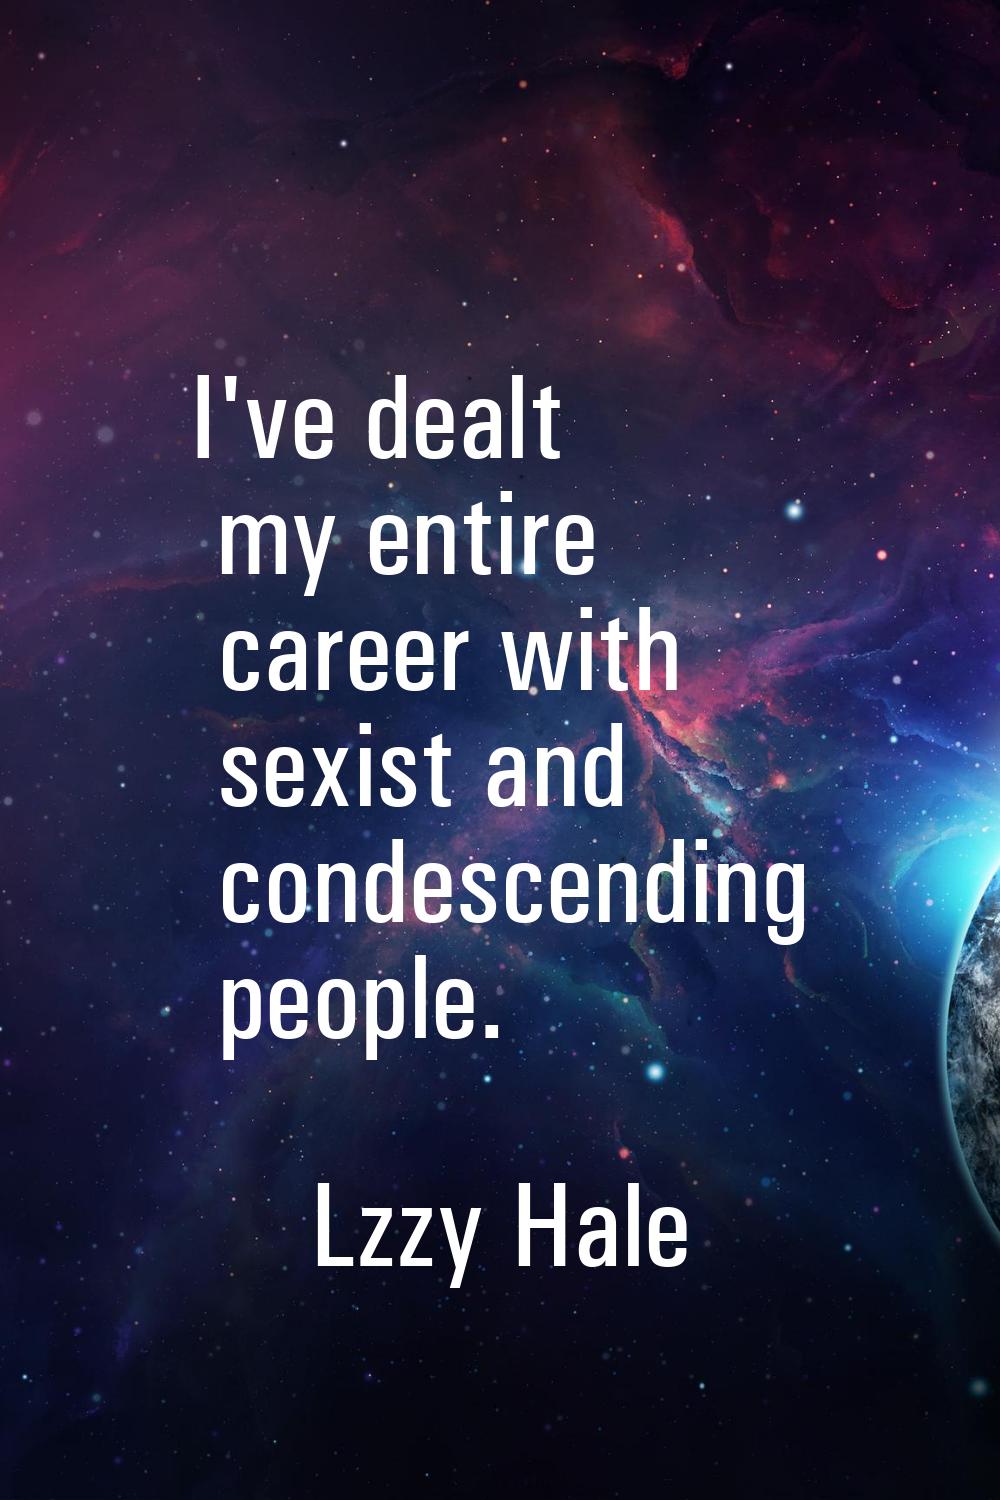 I've dealt my entire career with sexist and condescending people.